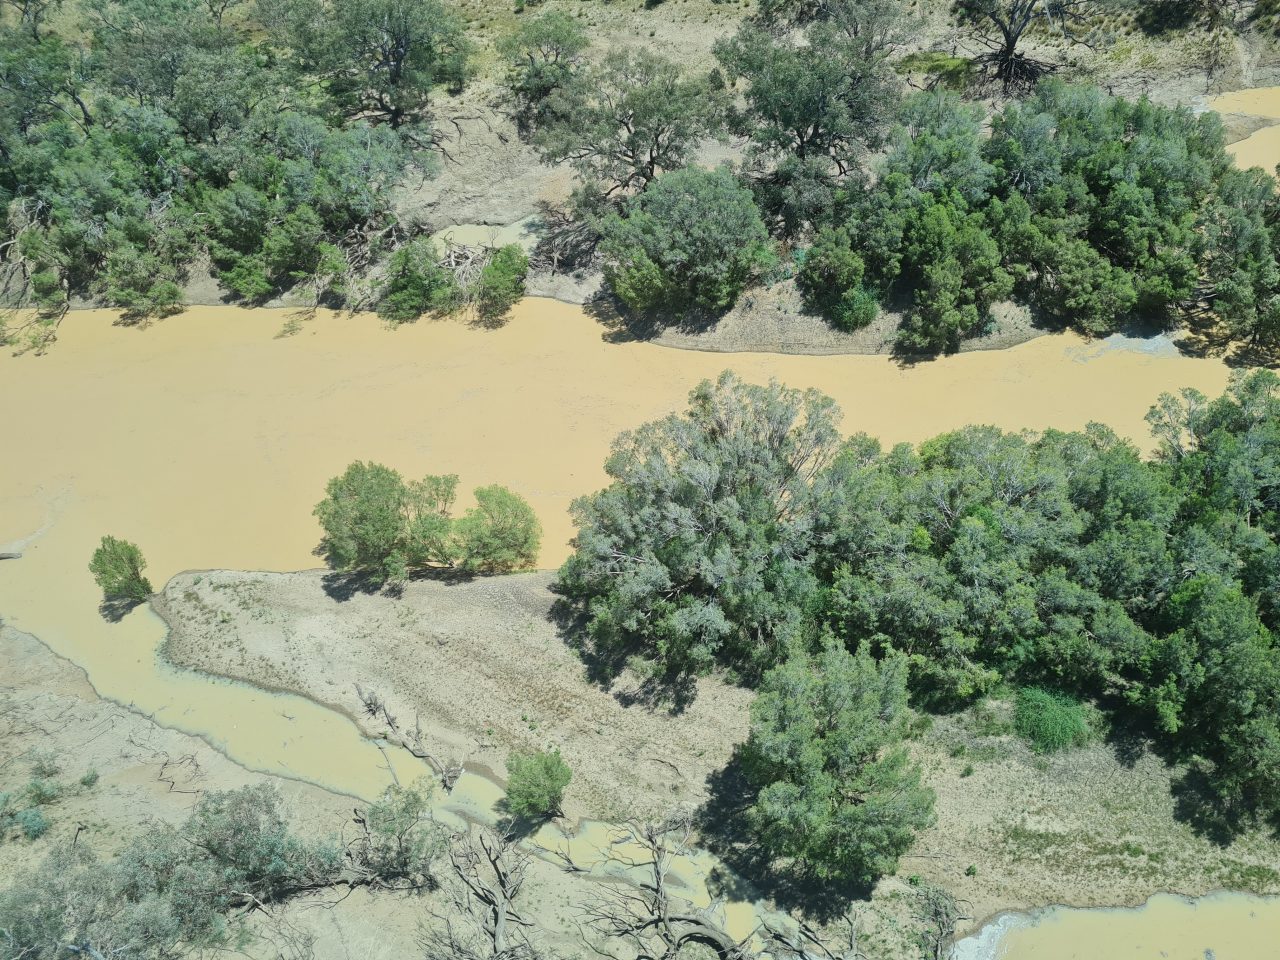 Aerial ohoto of section of river with yellow-brown water running up to the green tree line